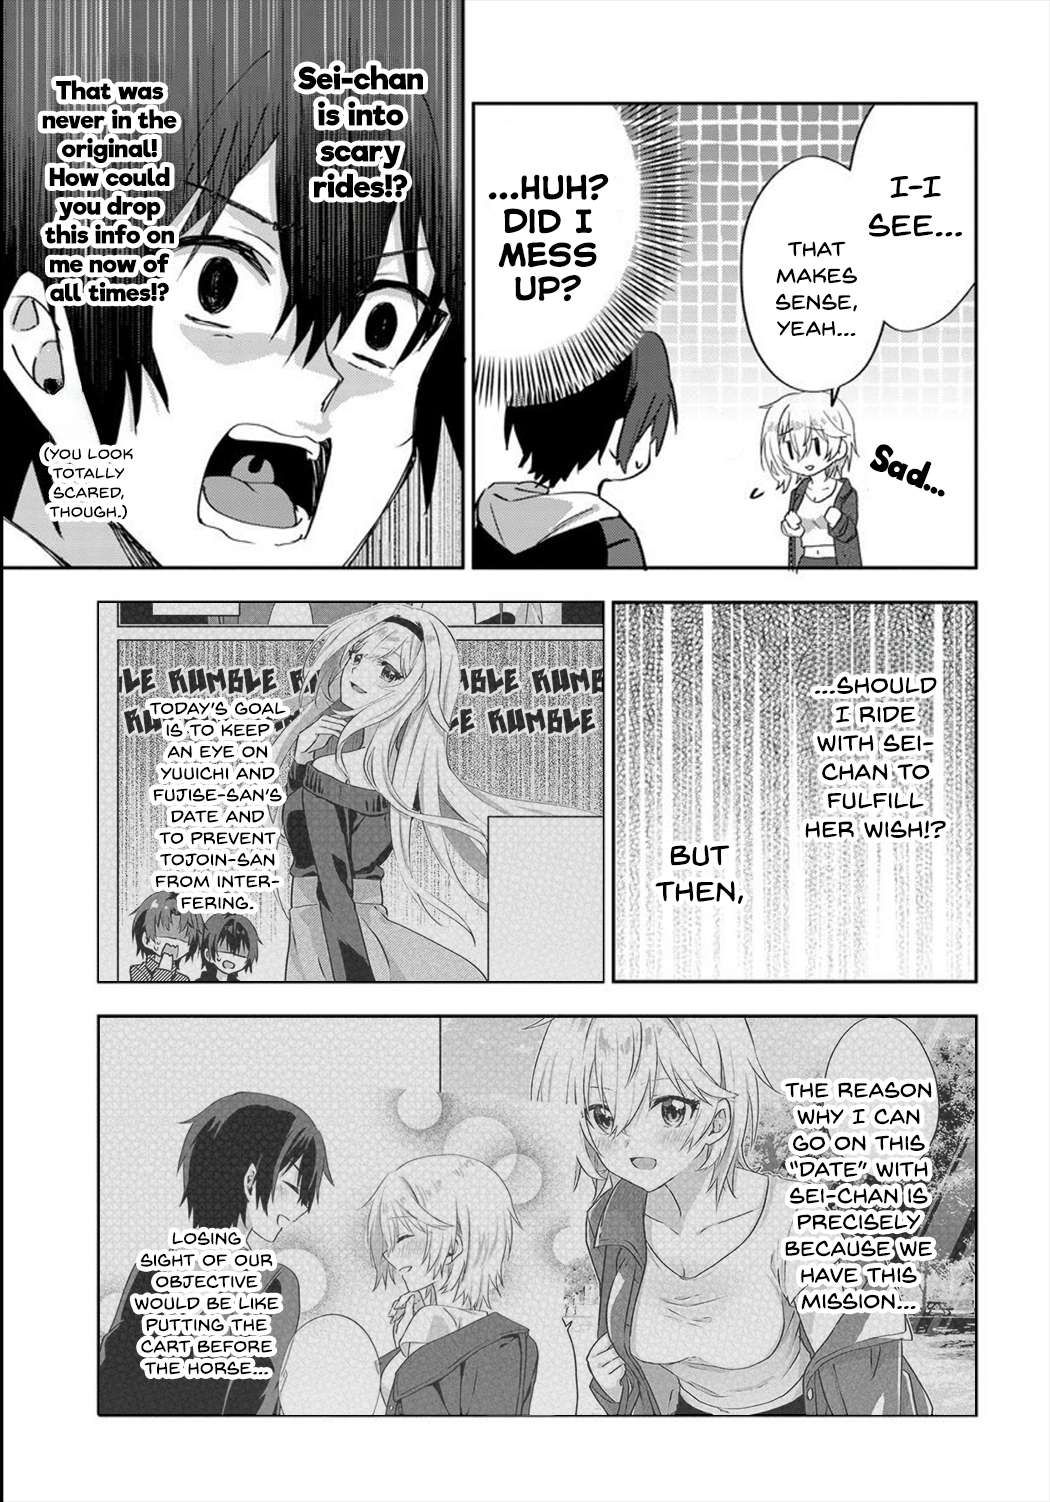 Since I’Ve Entered The World Of Romantic Comedy Manga, I’Ll Do My Best To Make The Losing Heroine Happy - chapter 7.1 - #3